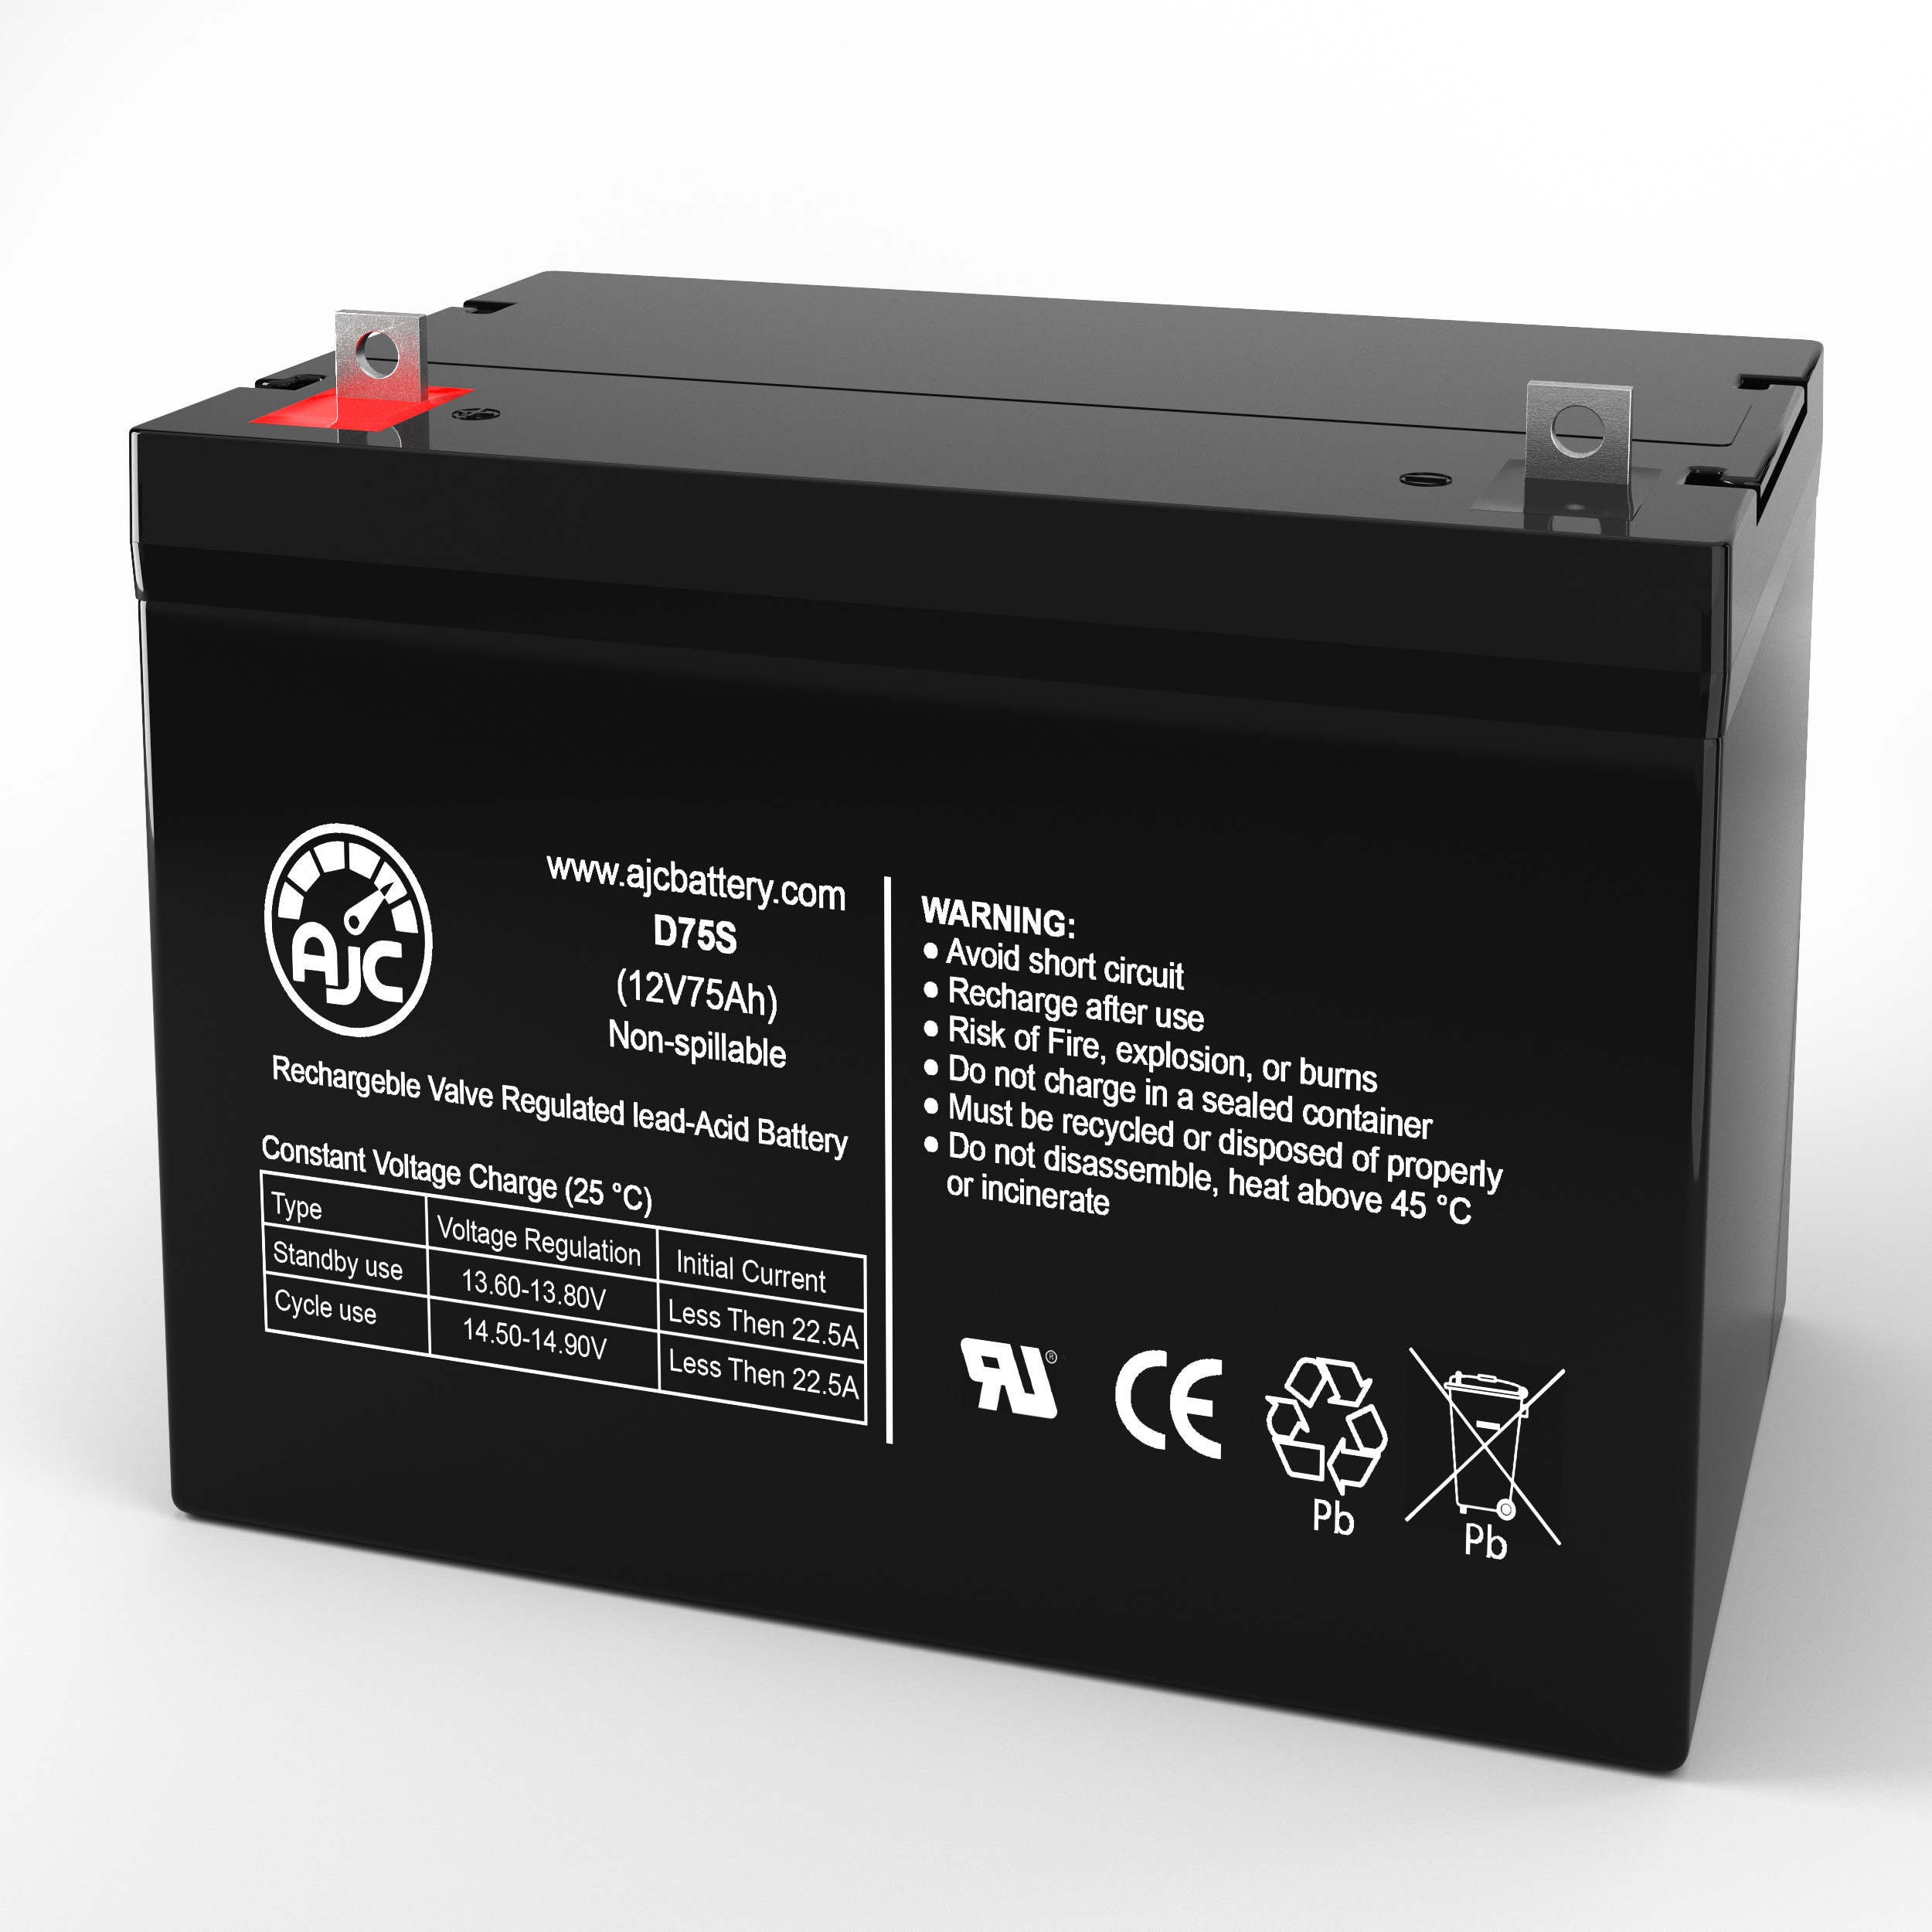 Universal Power Group UB12750IT 12V 75Ah UPS Battery - This Is an AJC Brand Replacement - image 1 of 6